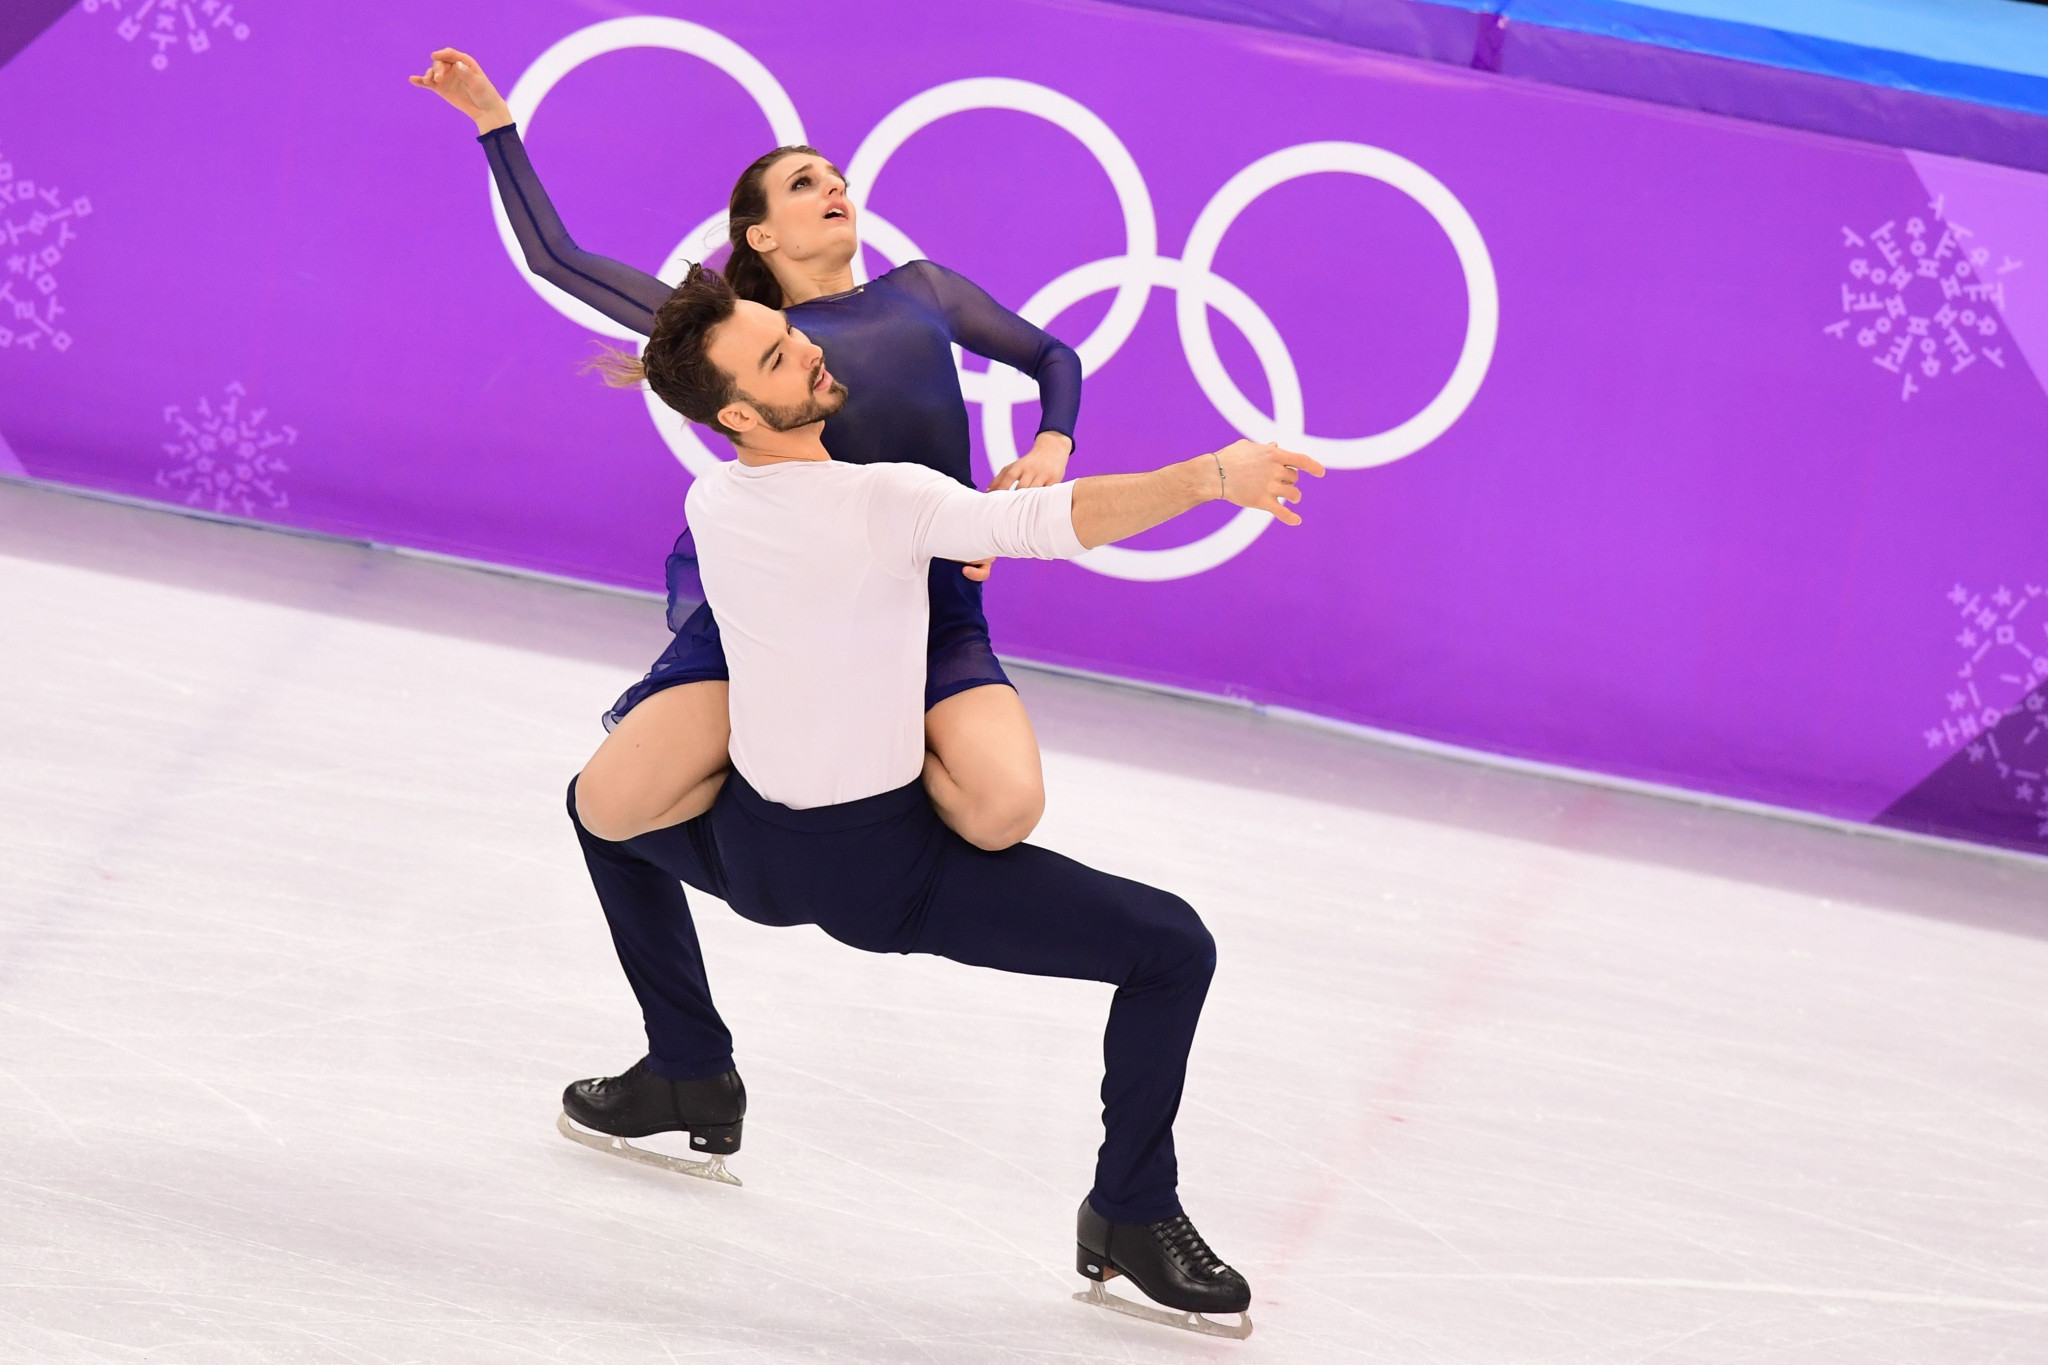 France's Gabriella Papadakis and Guillaume Cizeron claimed the silver medal ©Getty Images